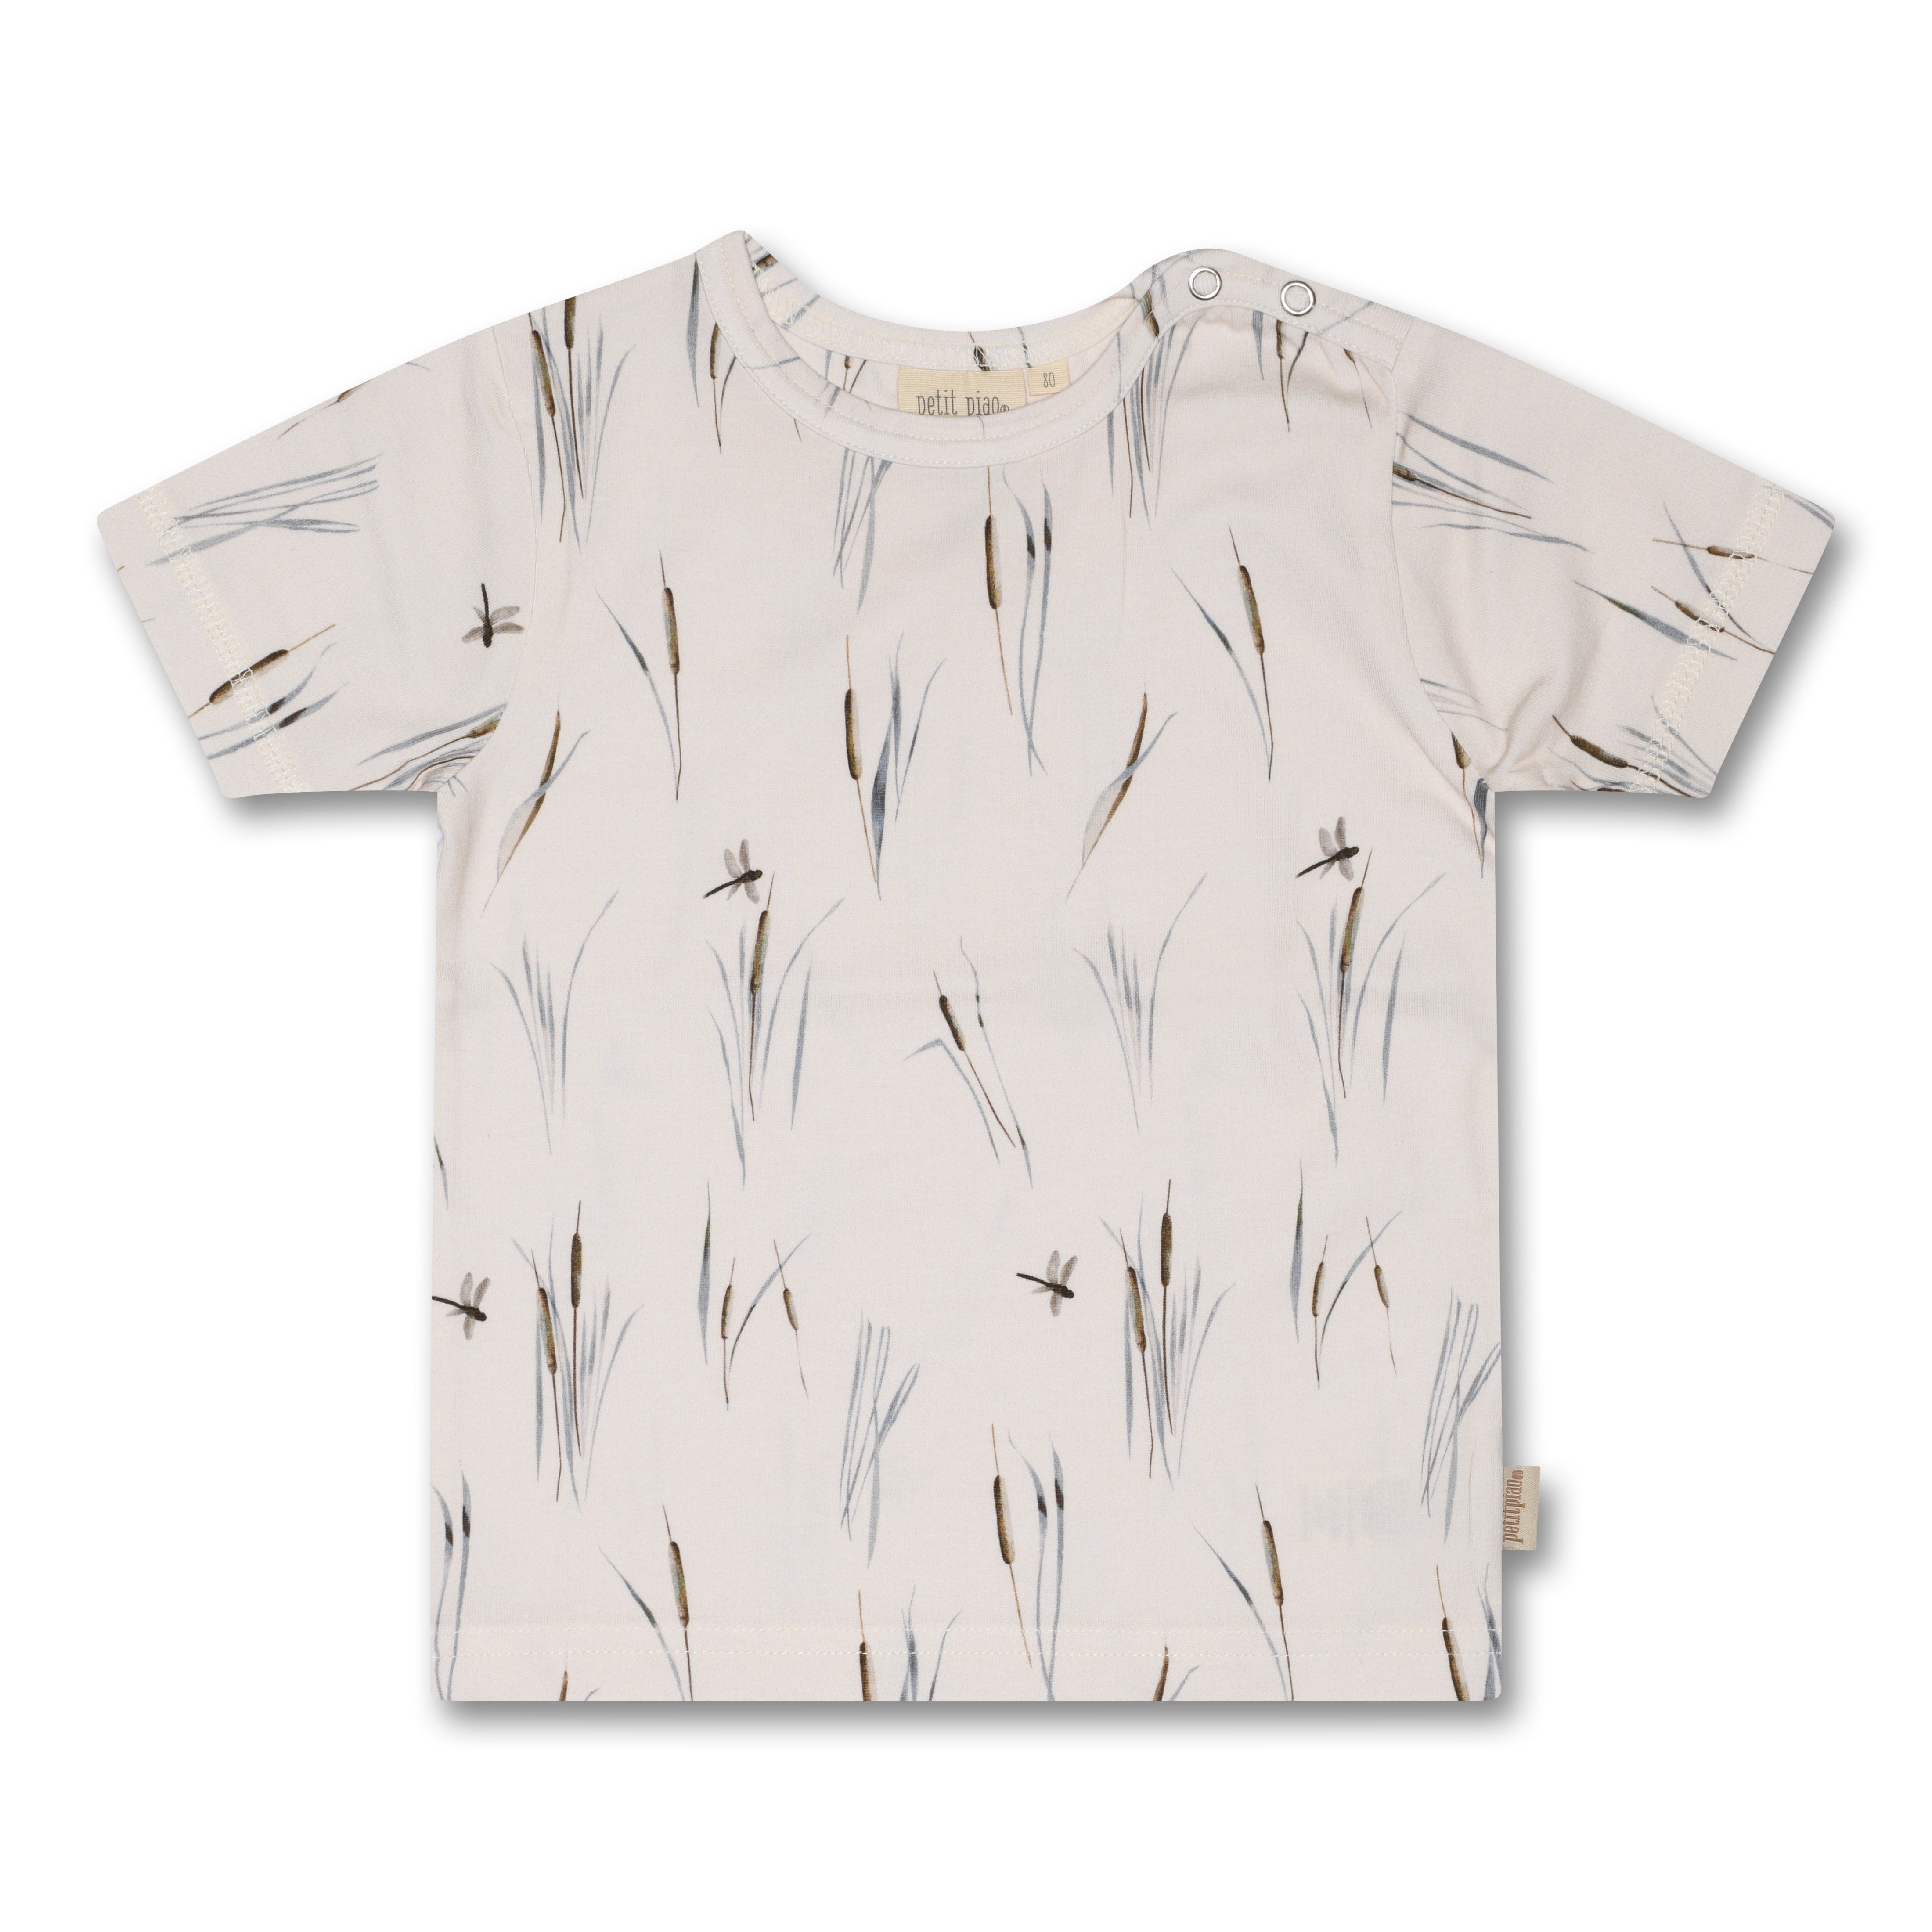 Petit Piao T-Shirt S/S Printed - Cattail